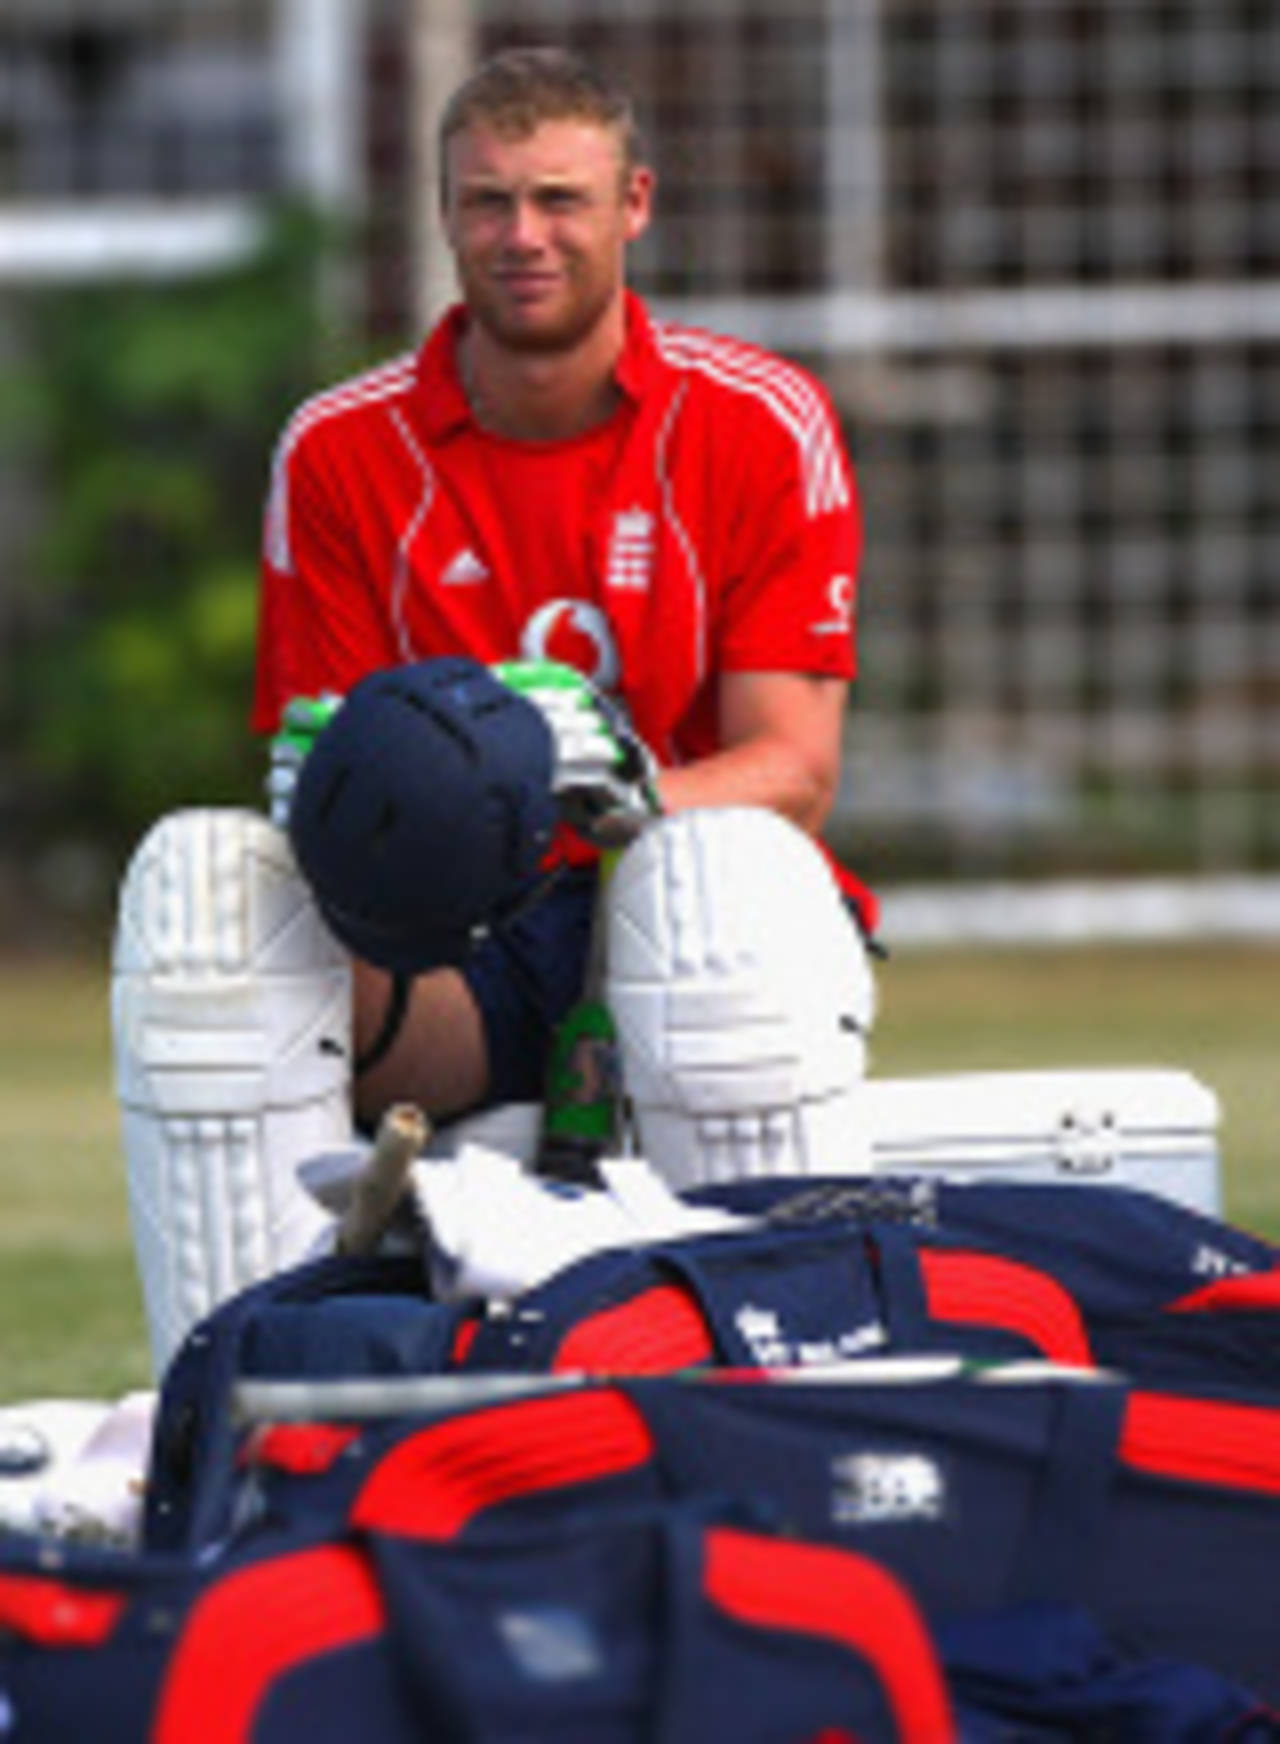 Andrew Flintoff waits for his turn in the nets, Antigua, February 10, 2009